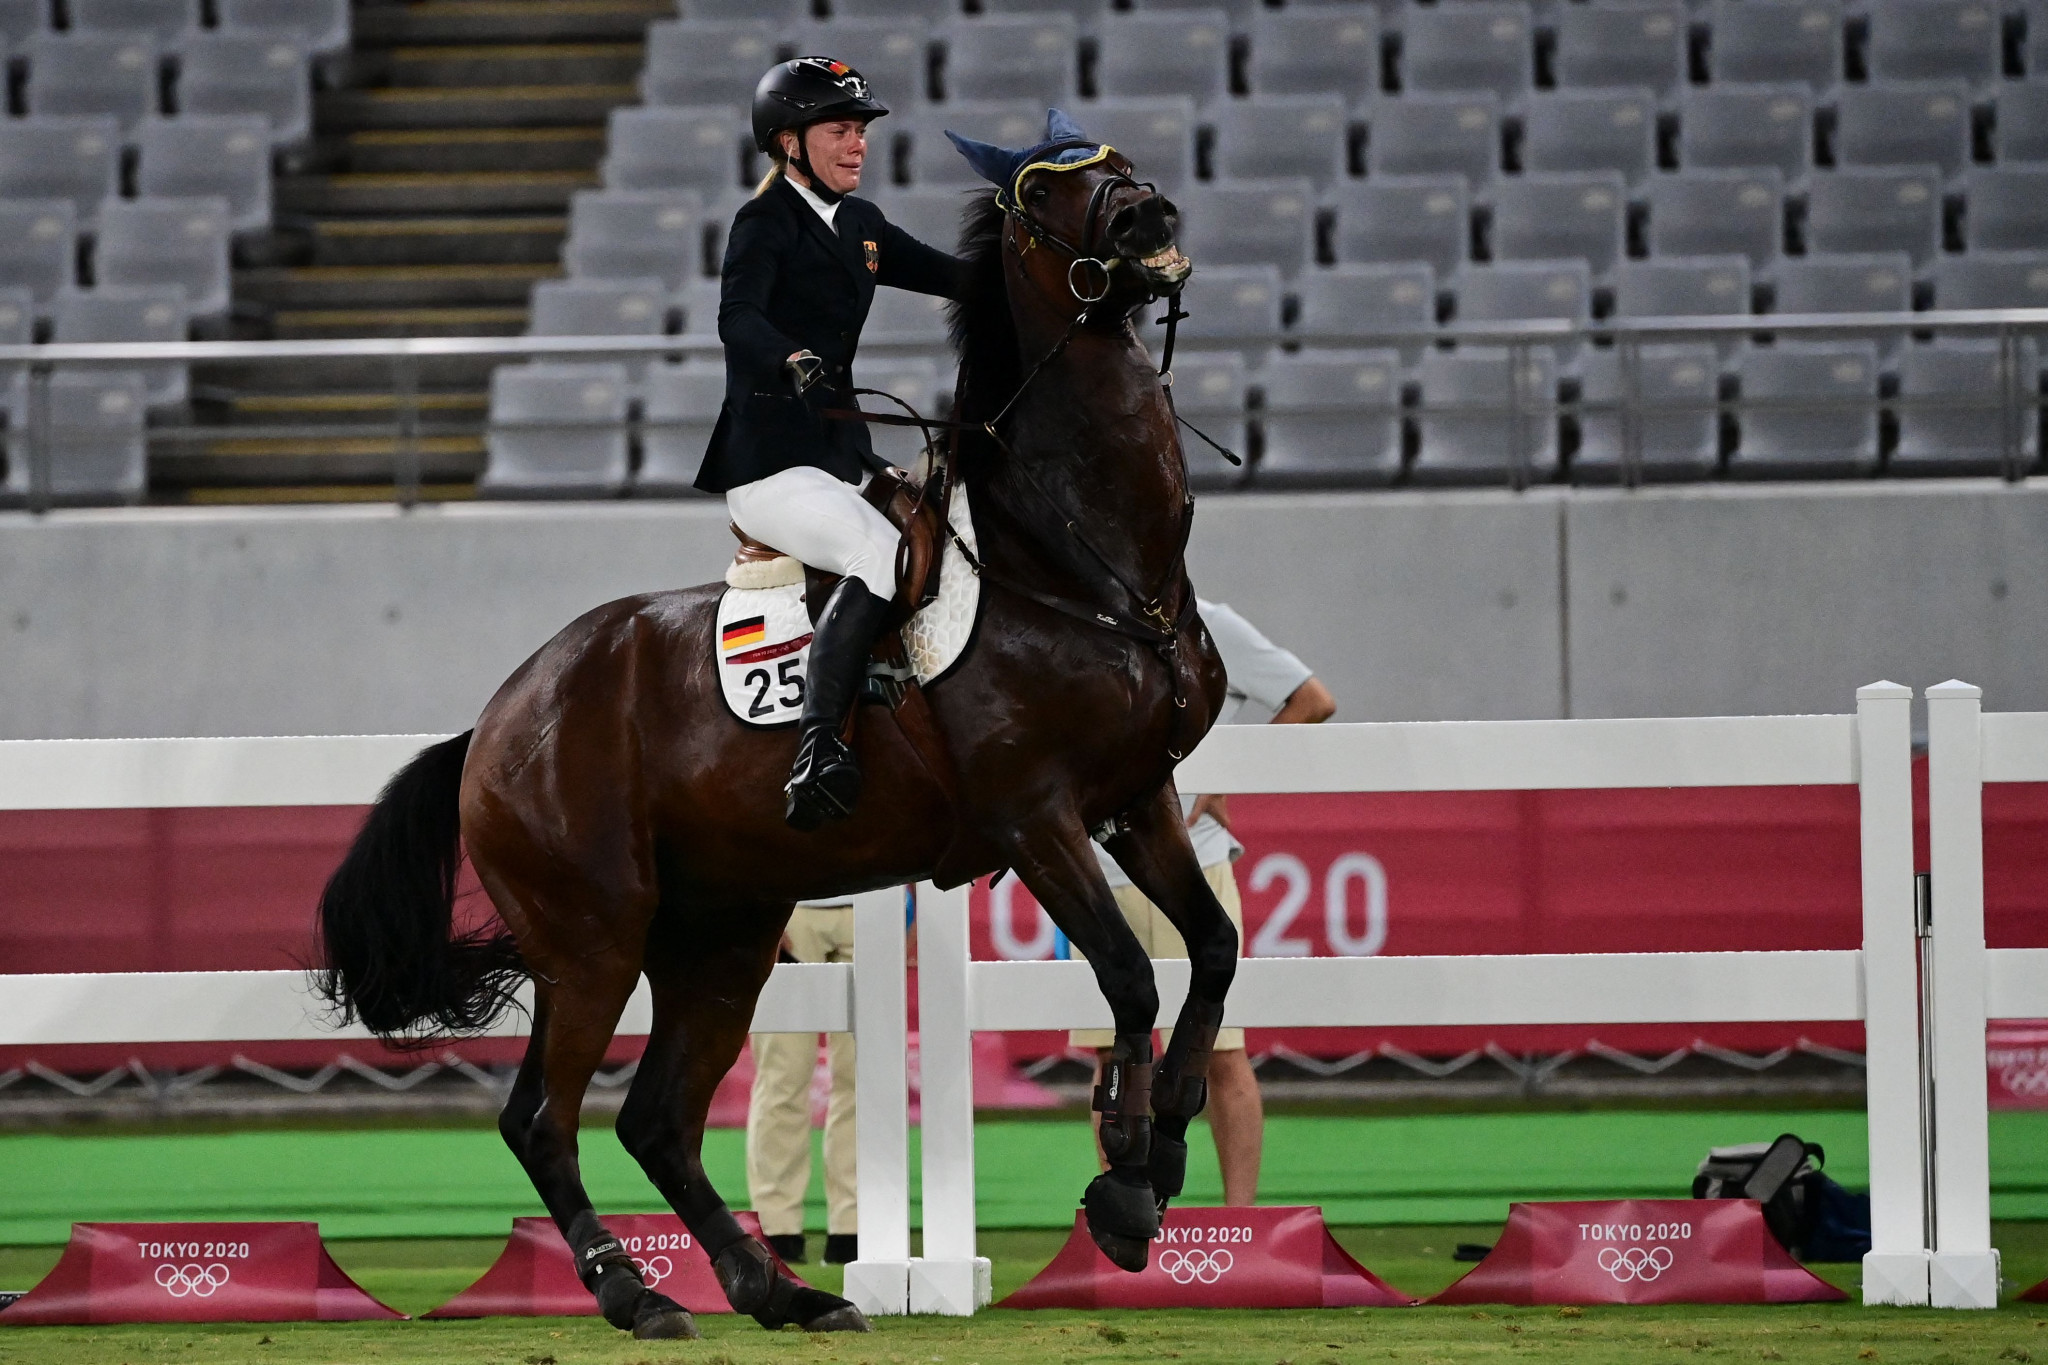 The horse abuse scandal overshadowed the modern pentathlon competition at Tokyo 2020 ©Getty Images